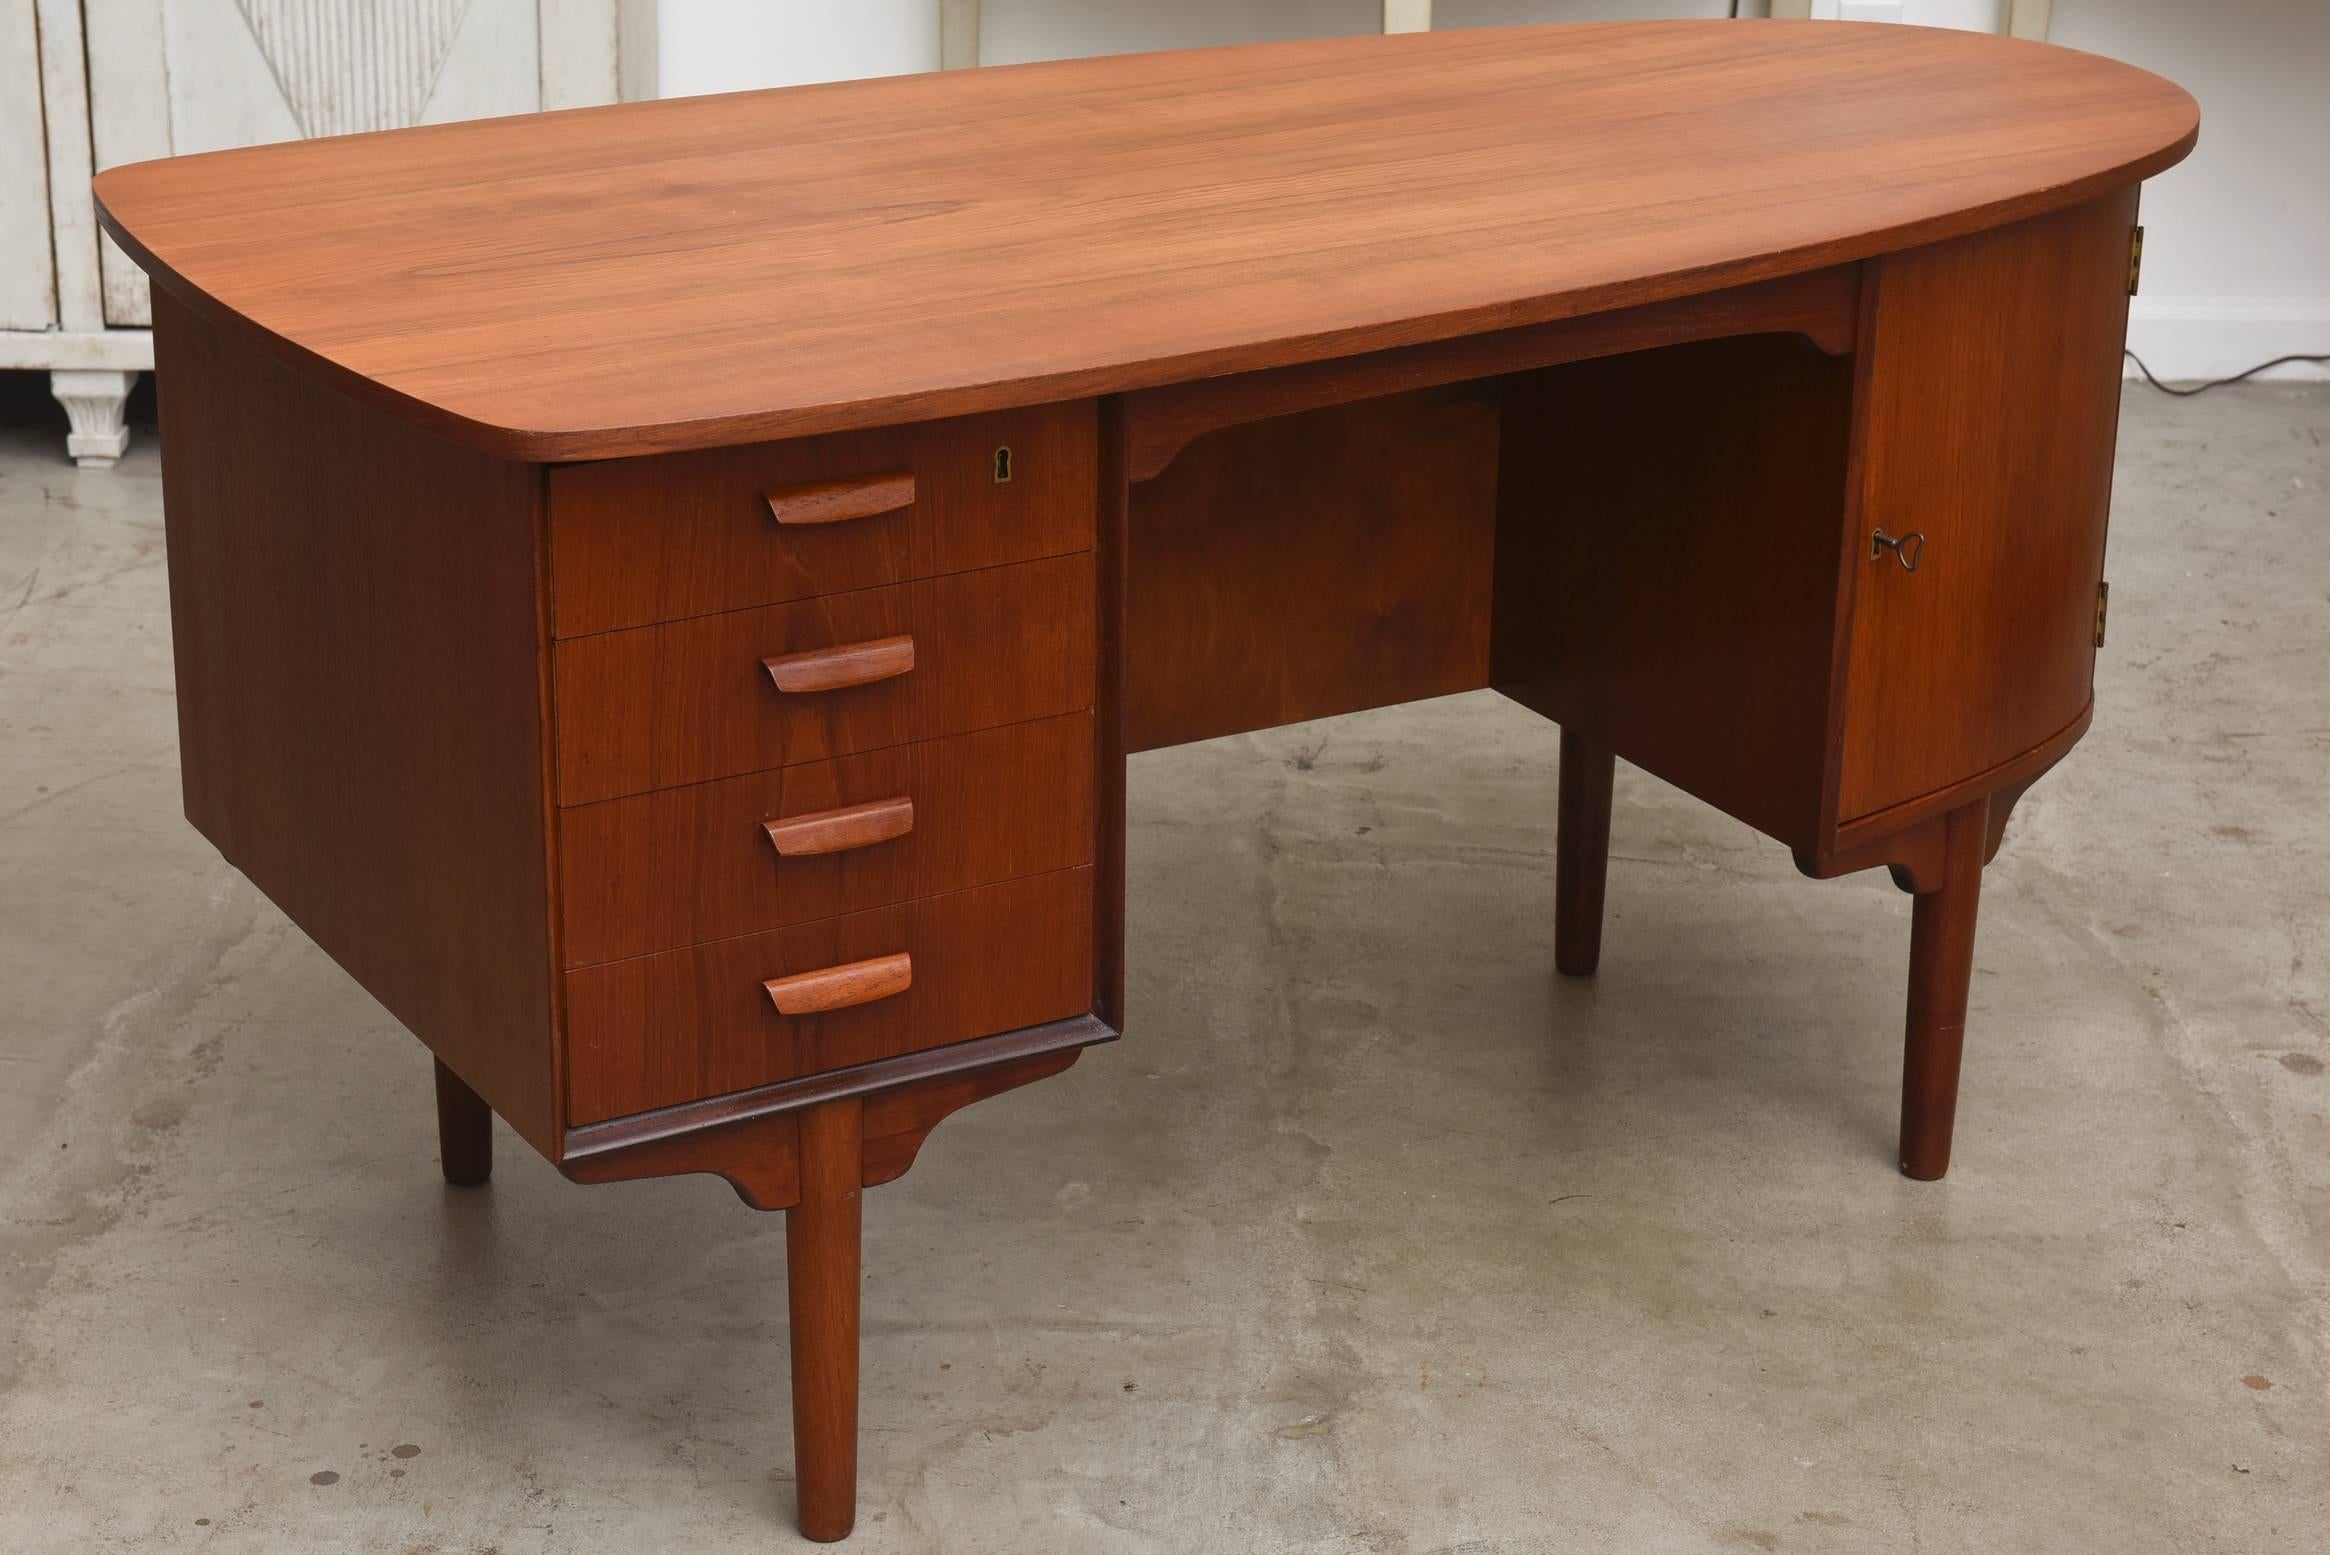 Vintage 1950s Danish Mid-Century Modern teak desk, in an unusual asymmetric streamlined shape with a curved side. The front has four drawers and a cabinet with pullout trays and shelves. The back features a cabinet and two shelves. Original hardware.